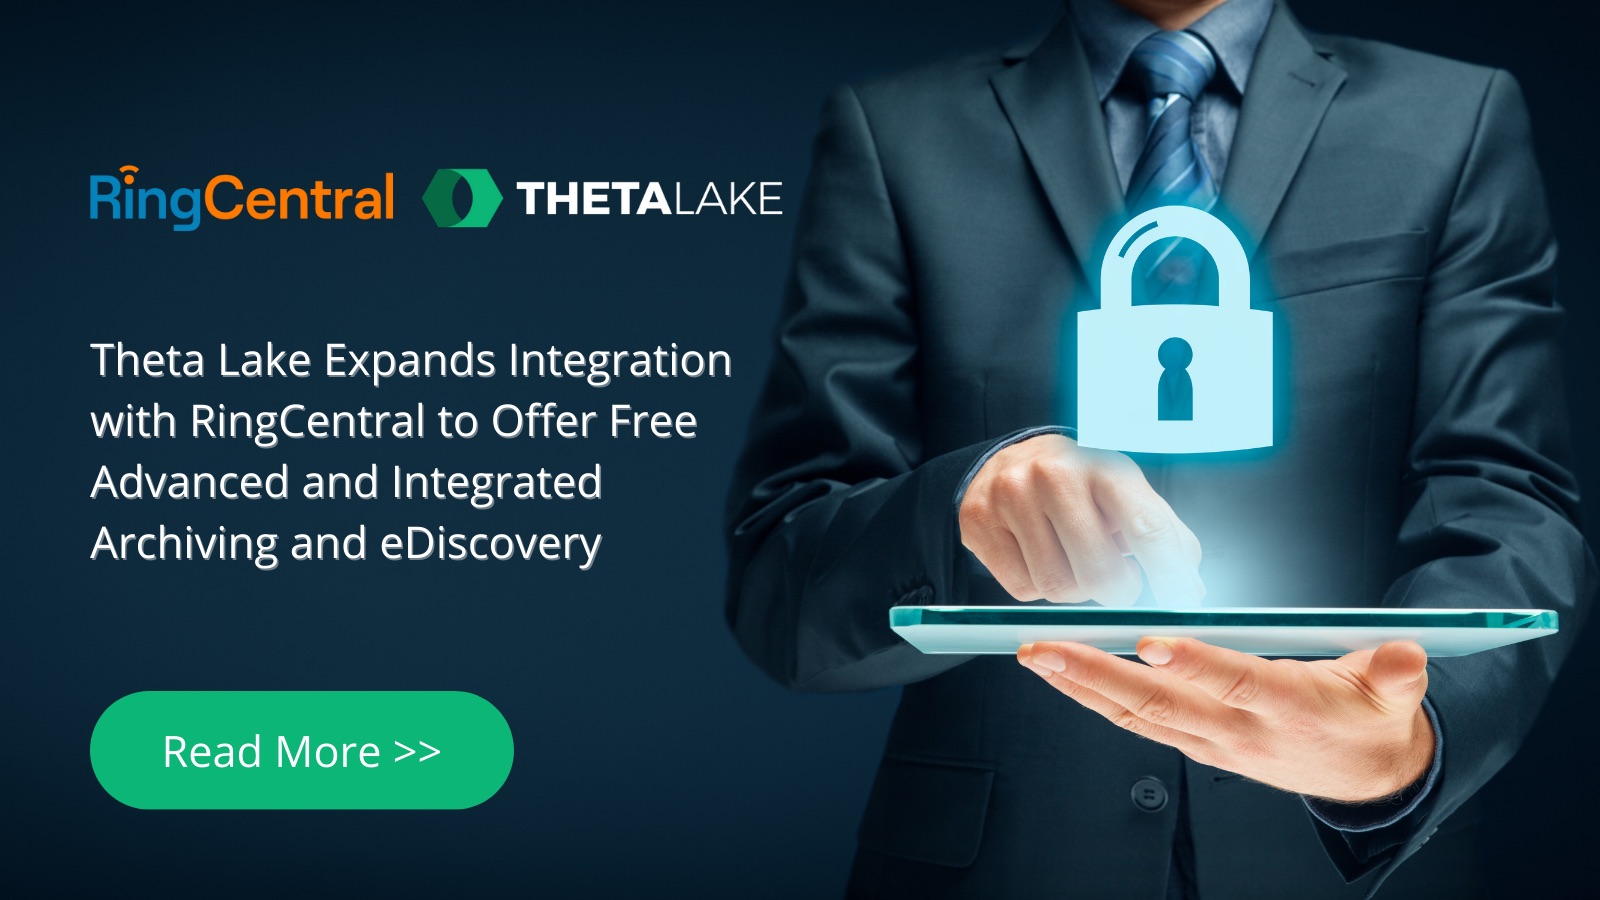 RingCentral and Theta Lake logo. Theta Lake expands integration with RingCentral to offer free advanced and integrated archiving and ediscovery